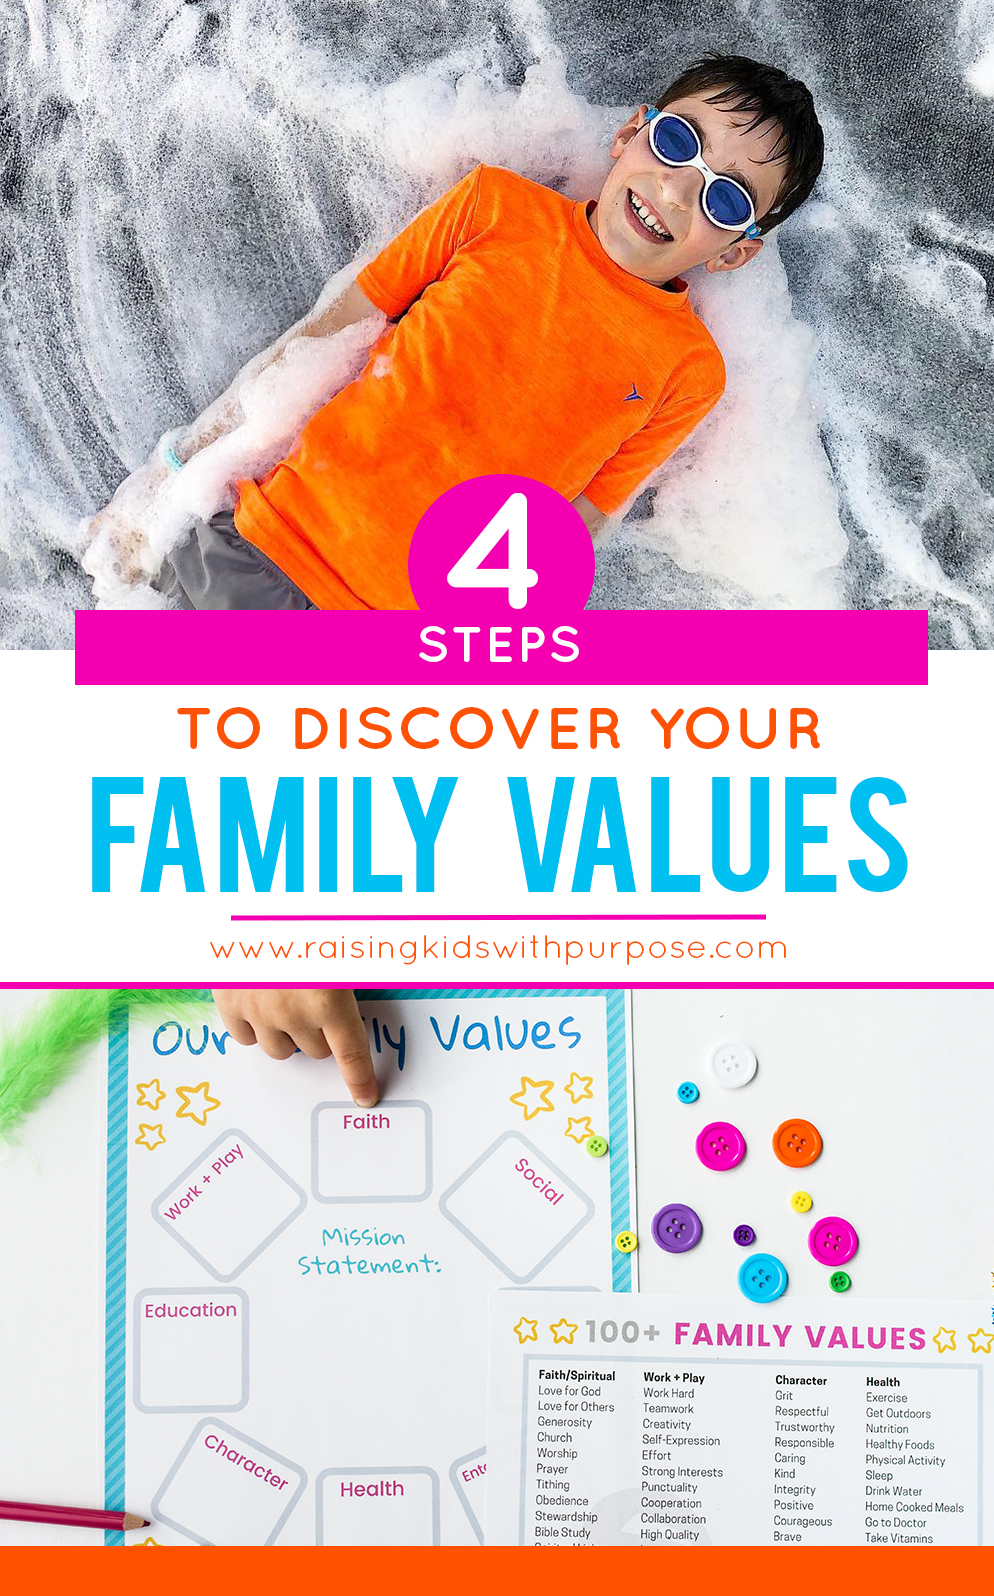 thesis about family values